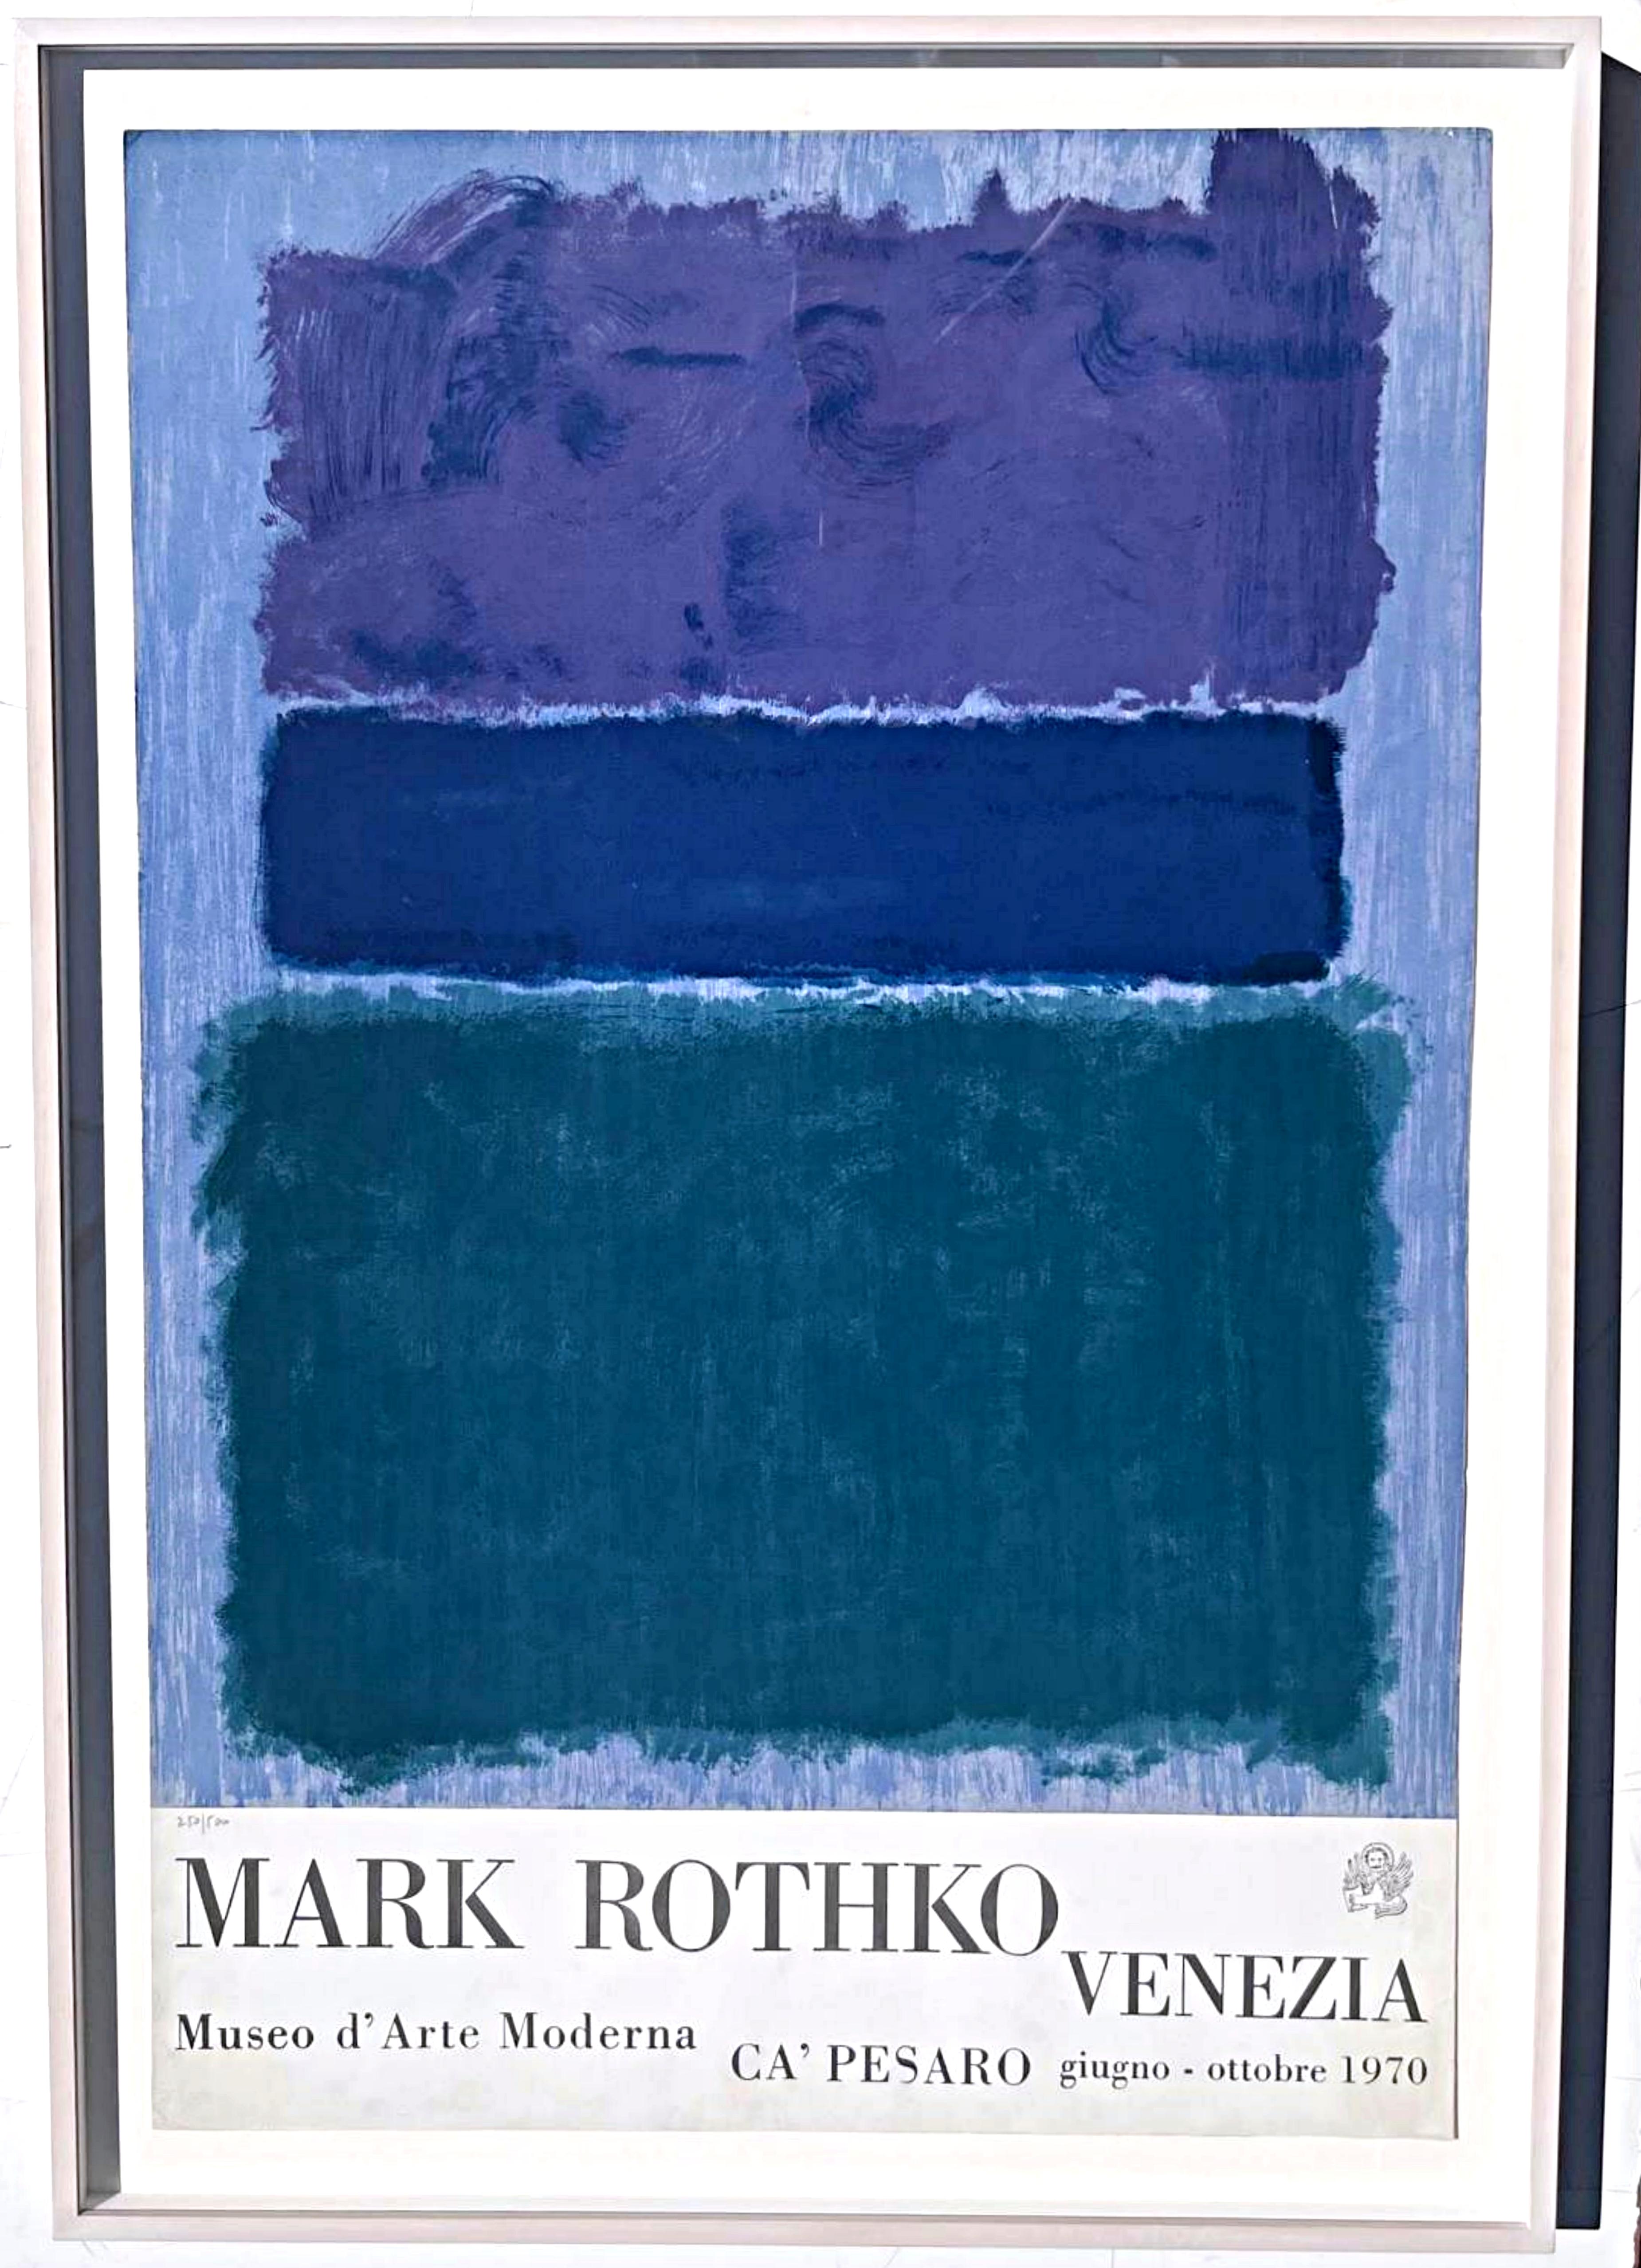 Mark Rothko at Museo d'Arte Moderna Ca' Pesaro, Venezia, 1970
Offset lithograph 
Numbered in pencil 250/500 in the lower left front, not signed
Frame Included: elegantly floated and framed in a museum quality white washed wood frame with UV